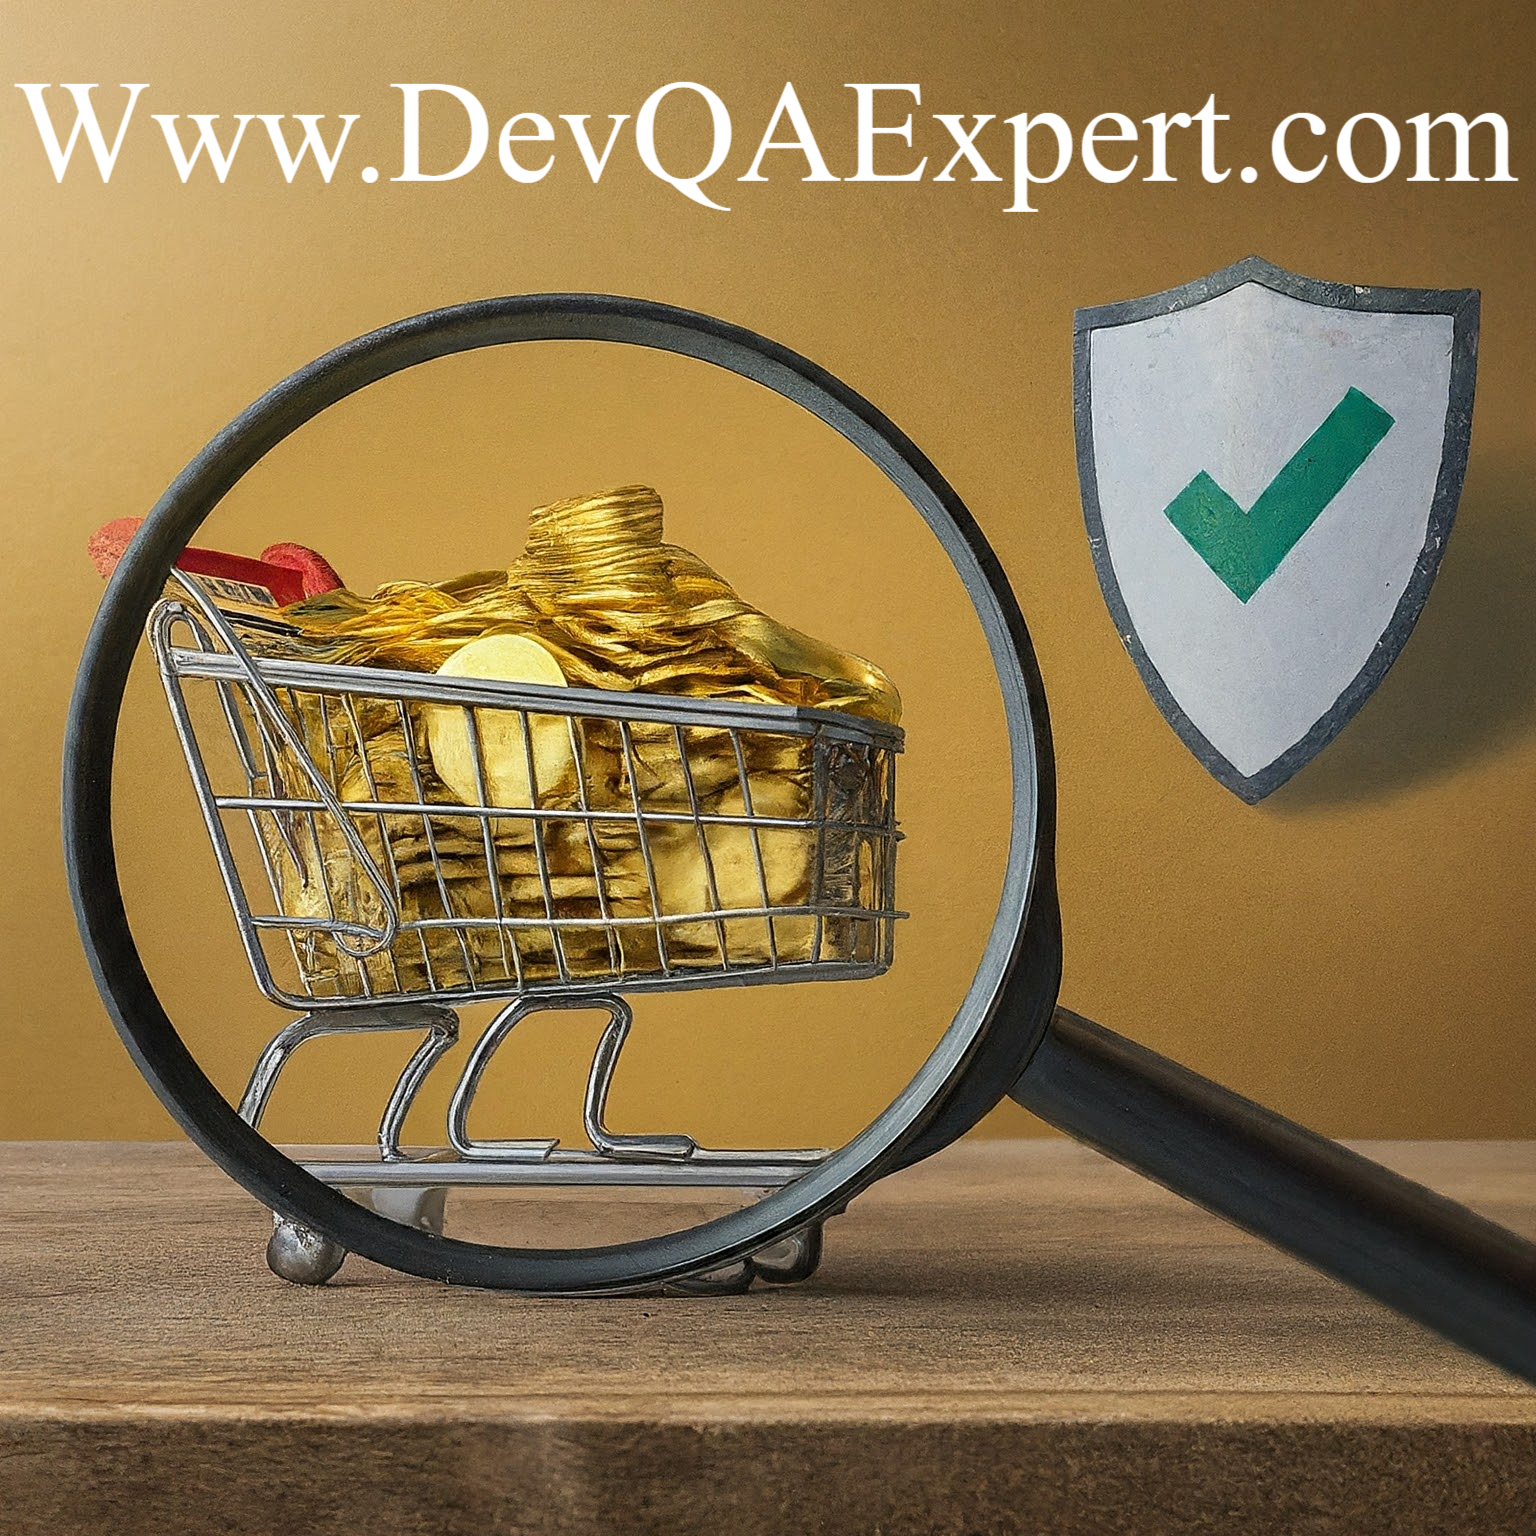 Software Testing in E-commerce Applications